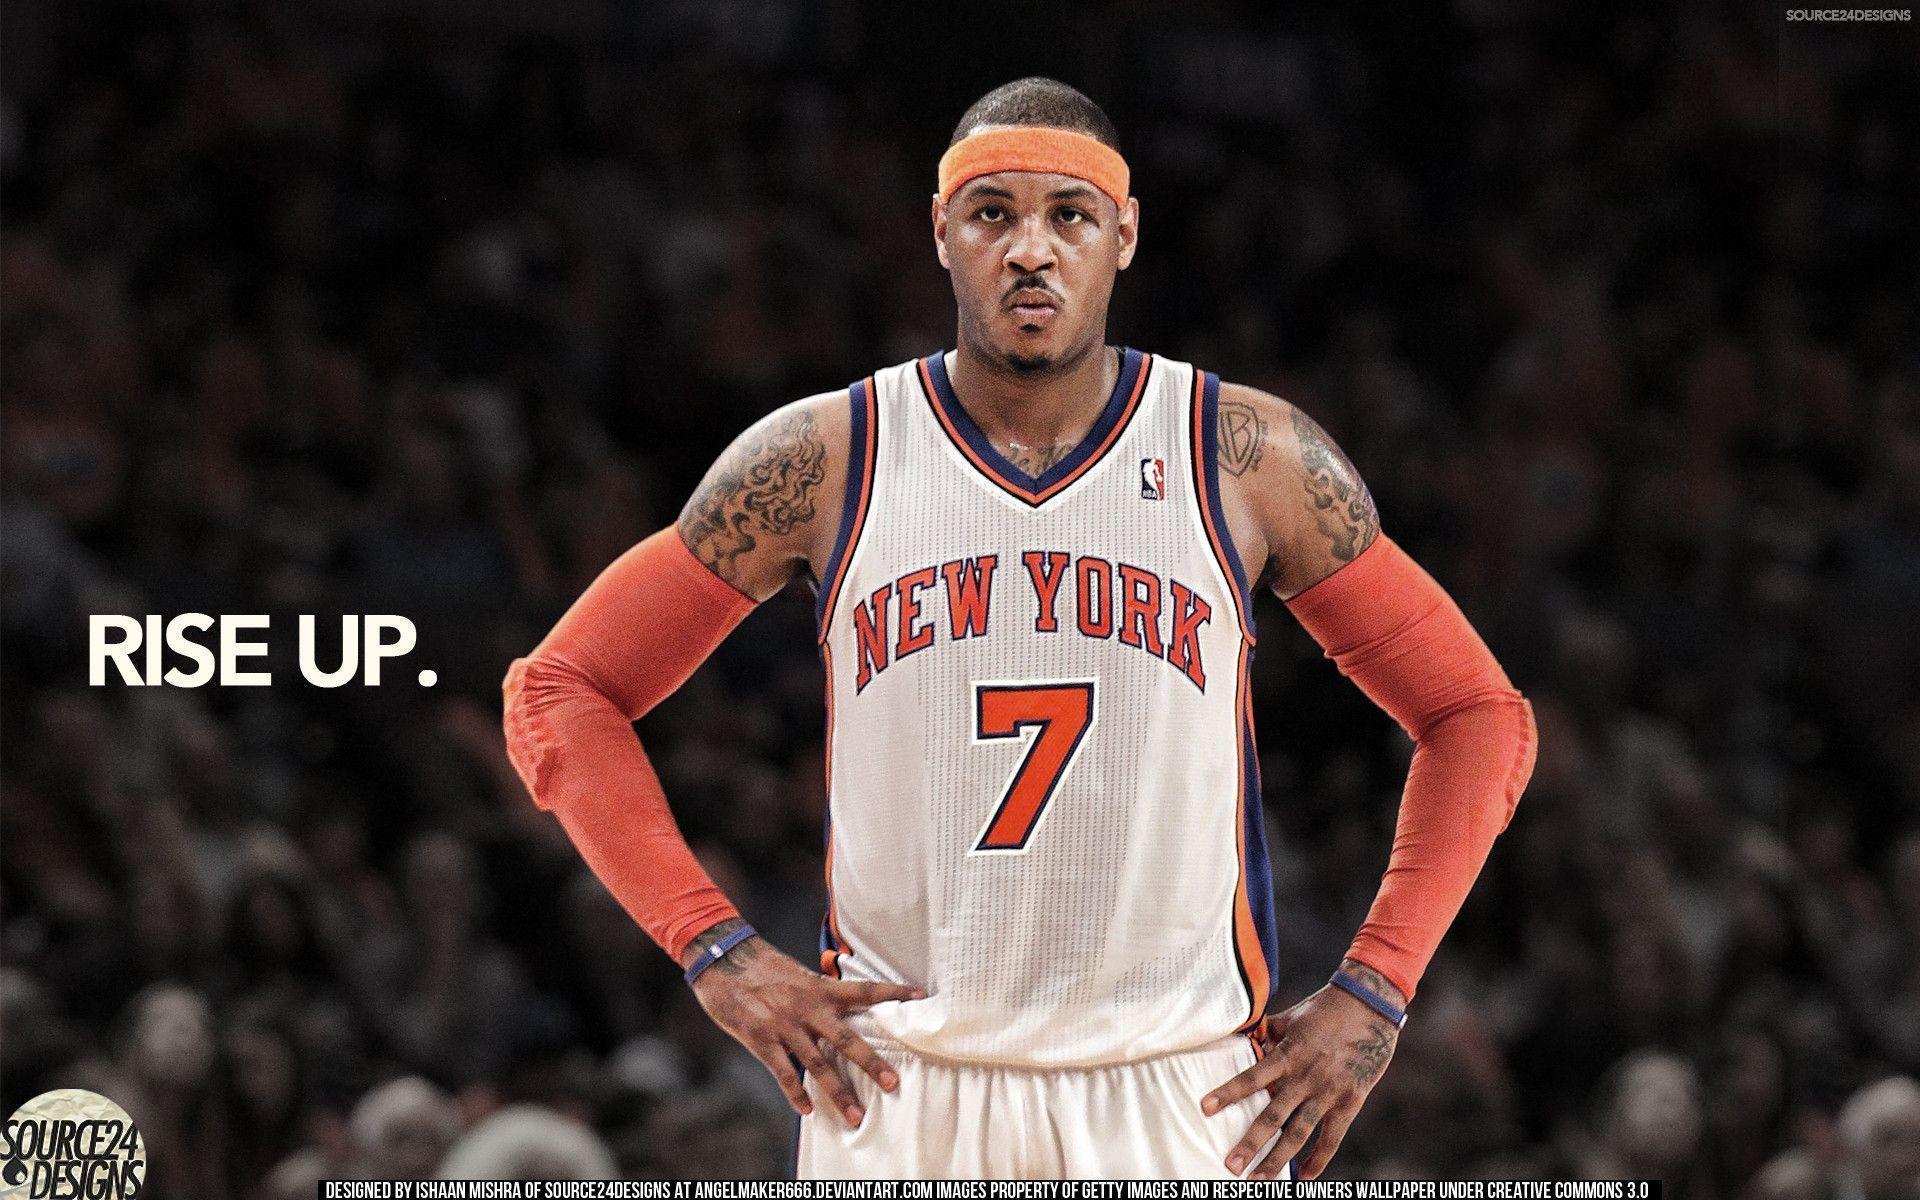 Carmelo Anthony Let Your Game Speak Wallpaper